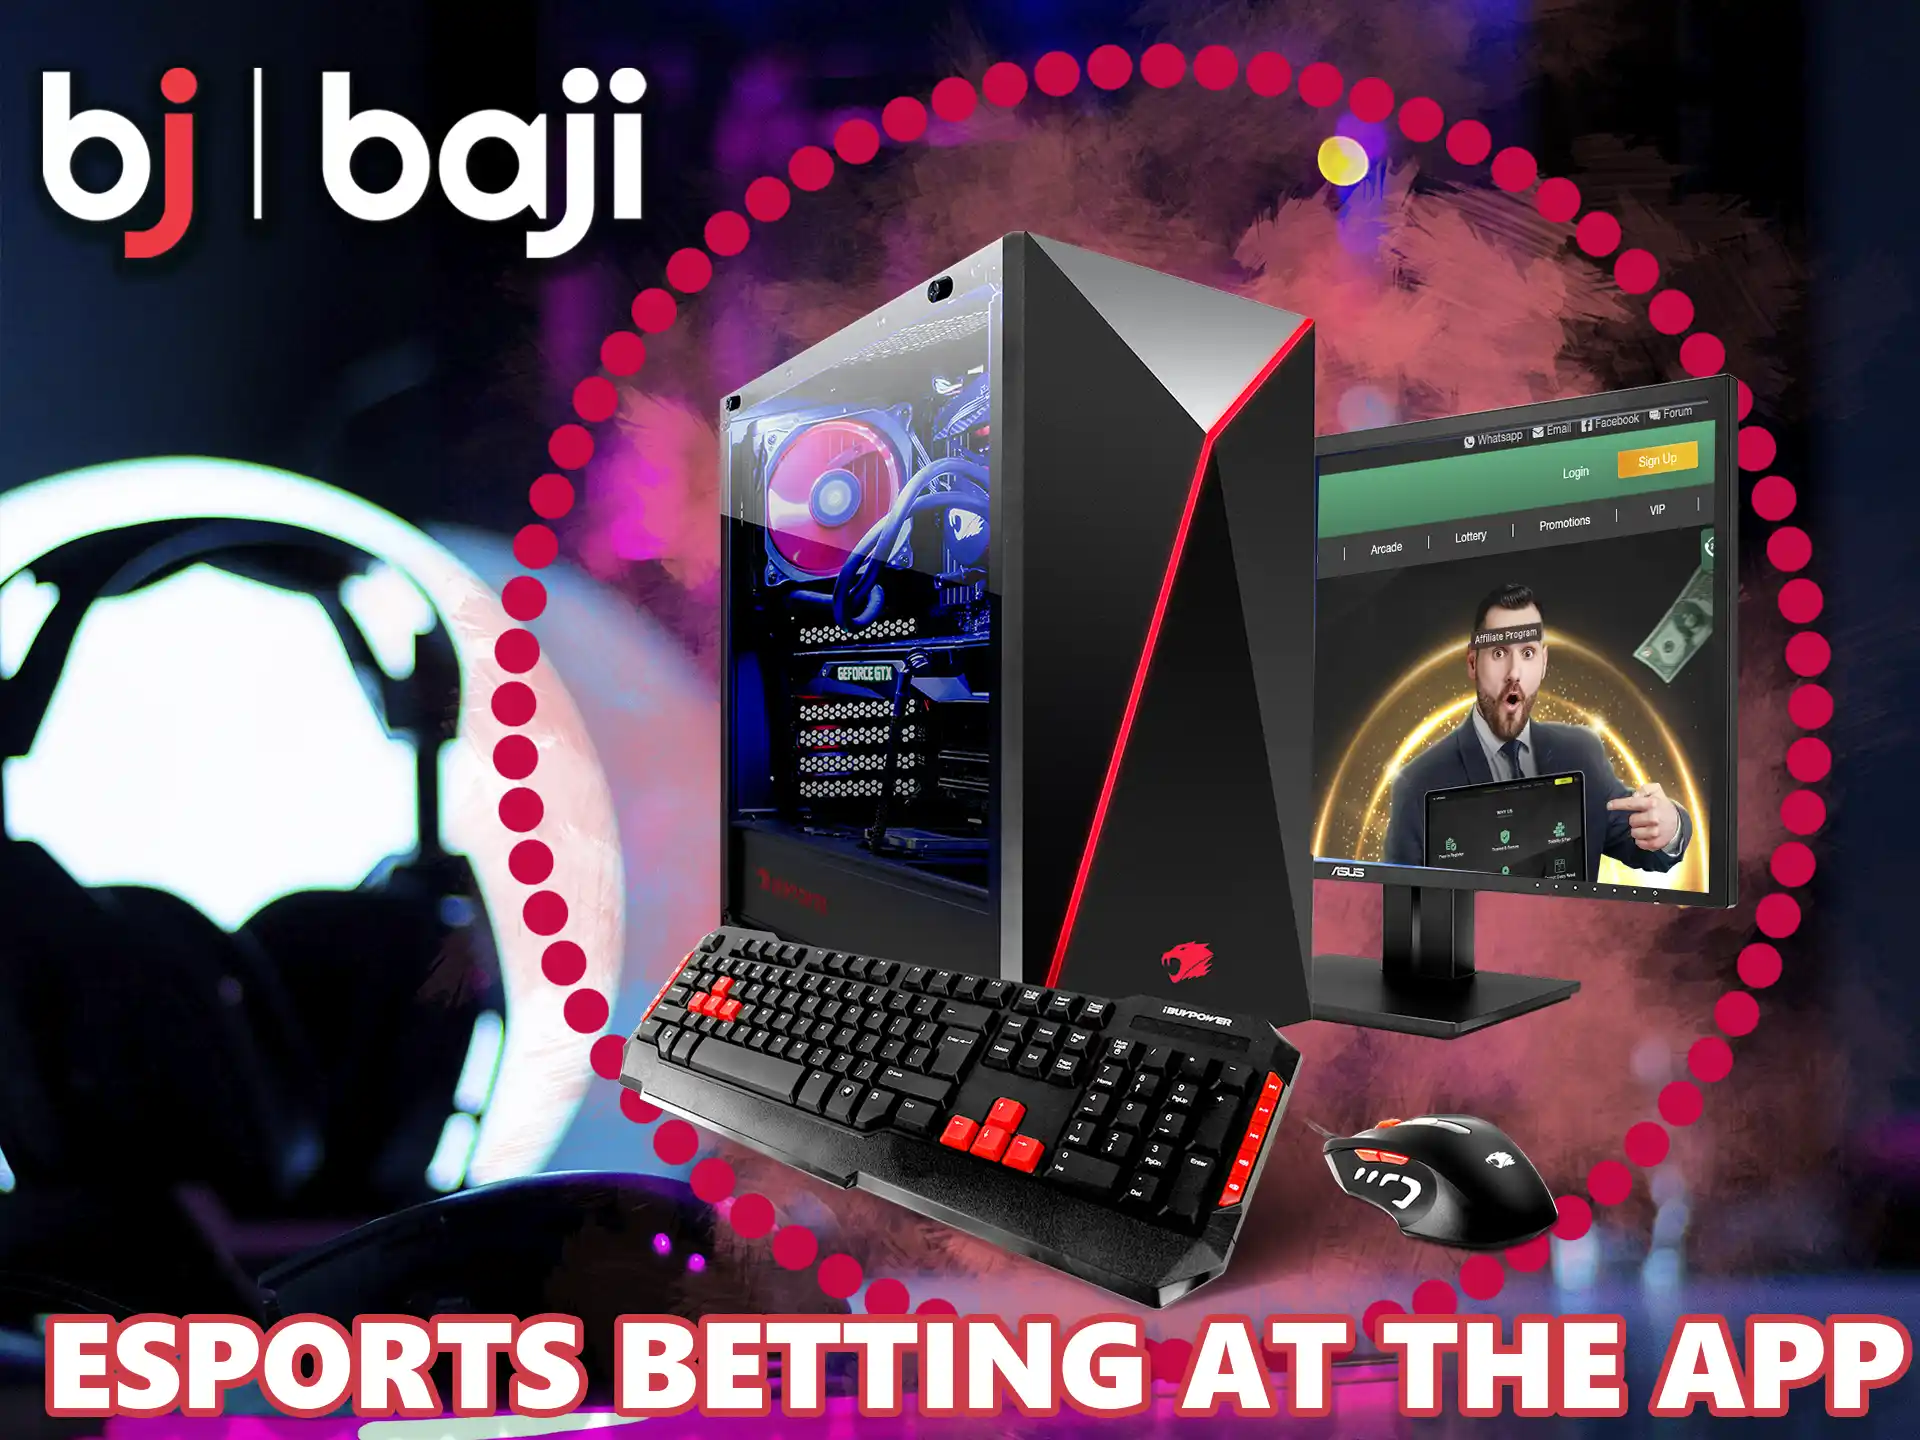 Fans of computer games will appreciate this section Baji app, here are the most popular competitions.